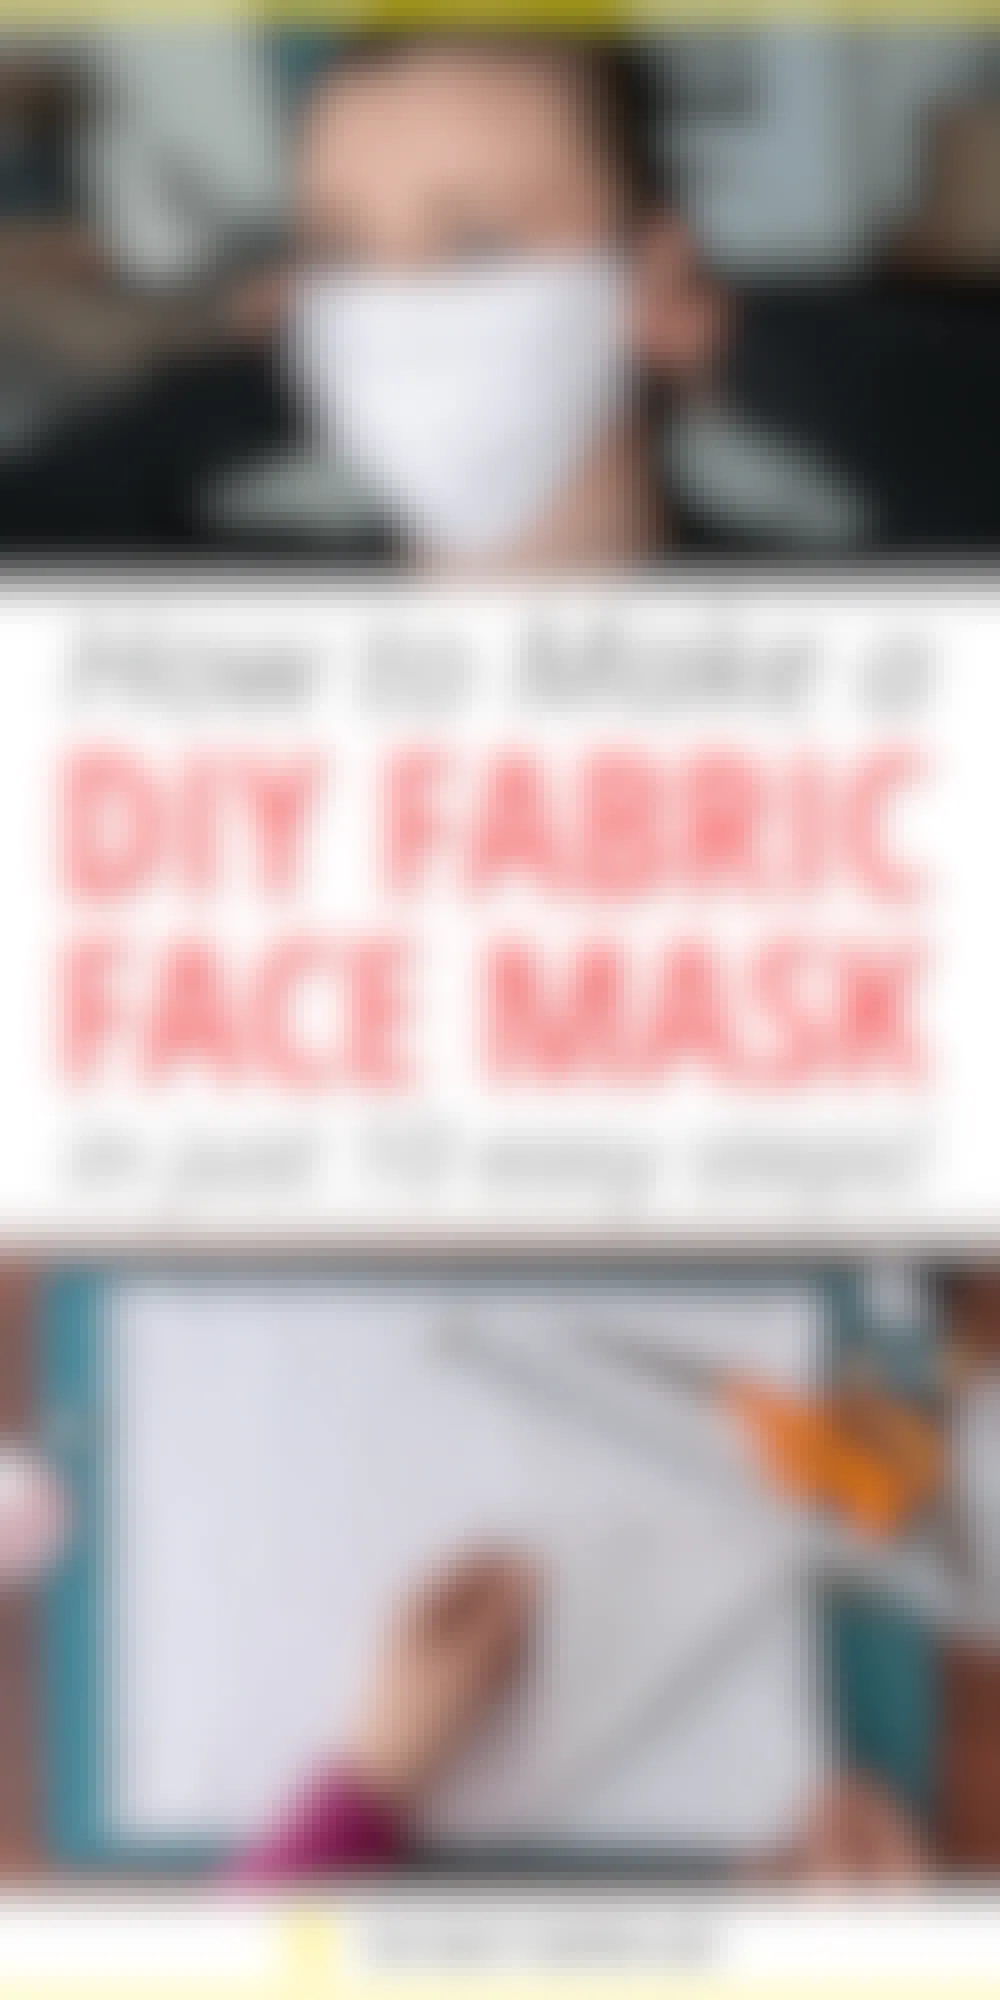 How to Make a Fabric Face Mask in 10 Easy Steps